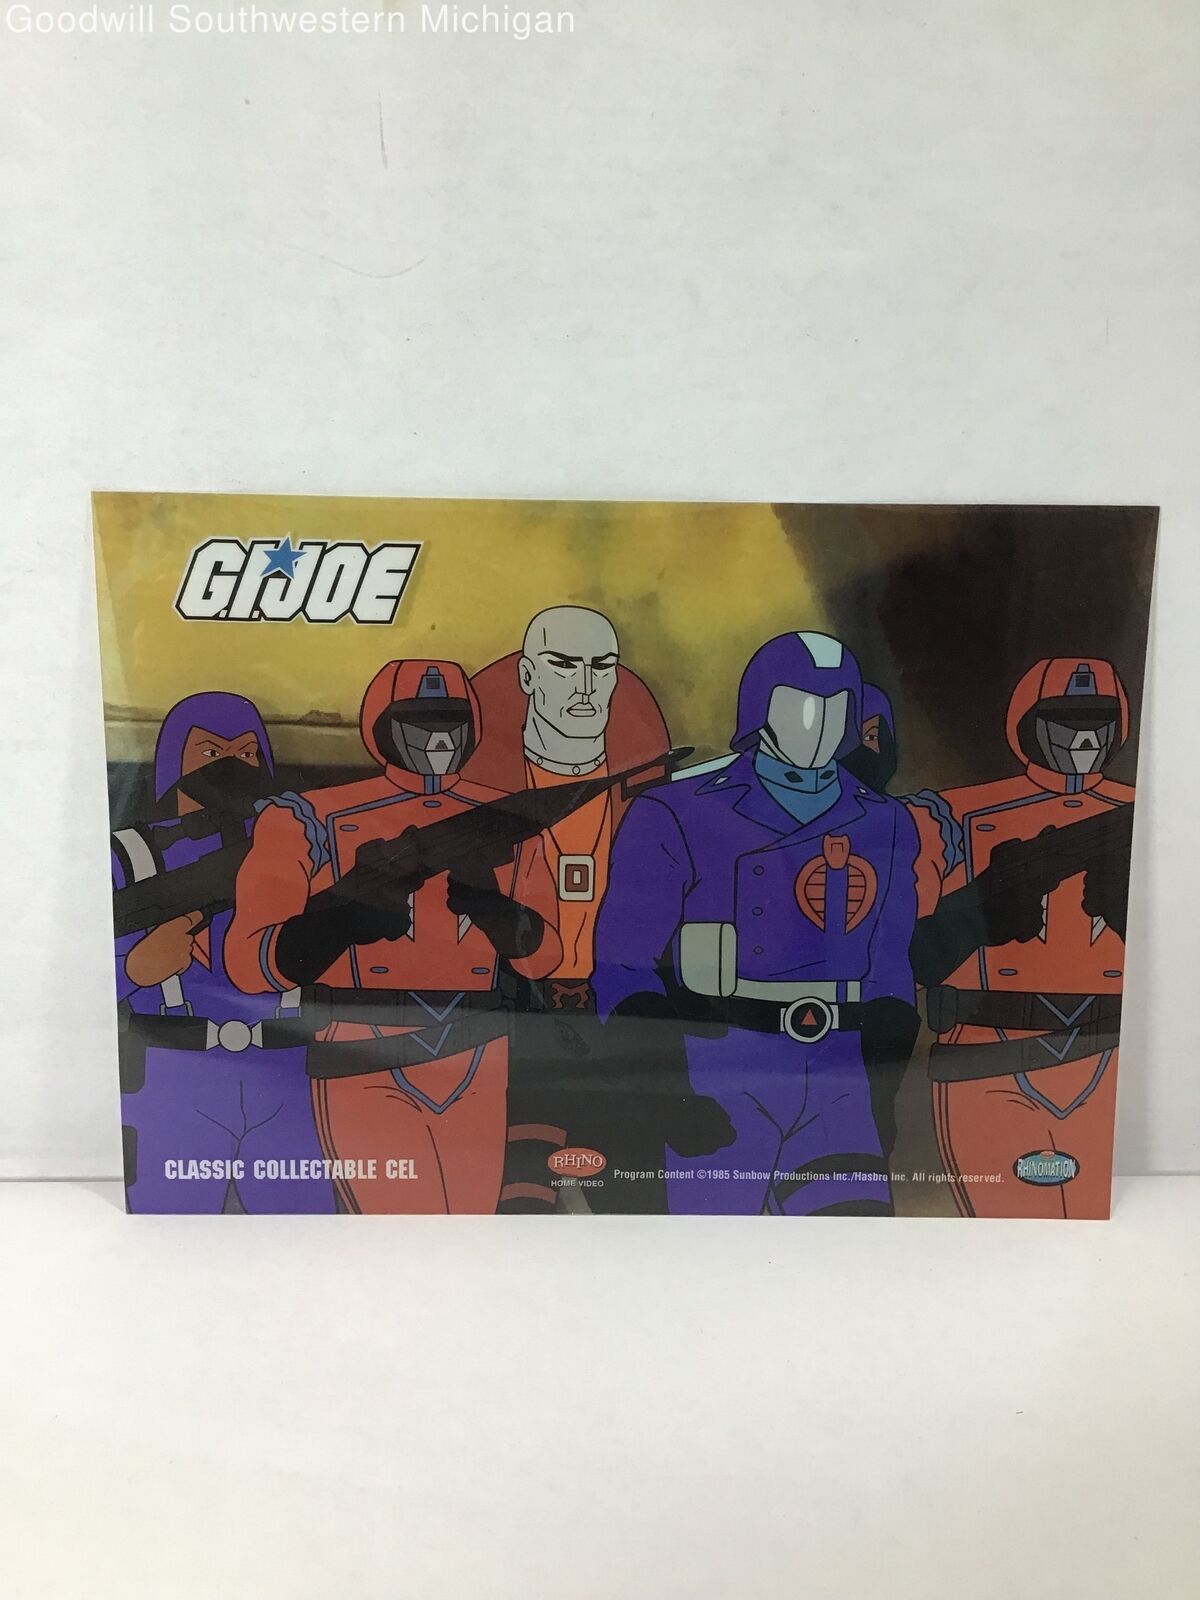 Vintage 1985 G.I. Joe Classic Collectable Cel